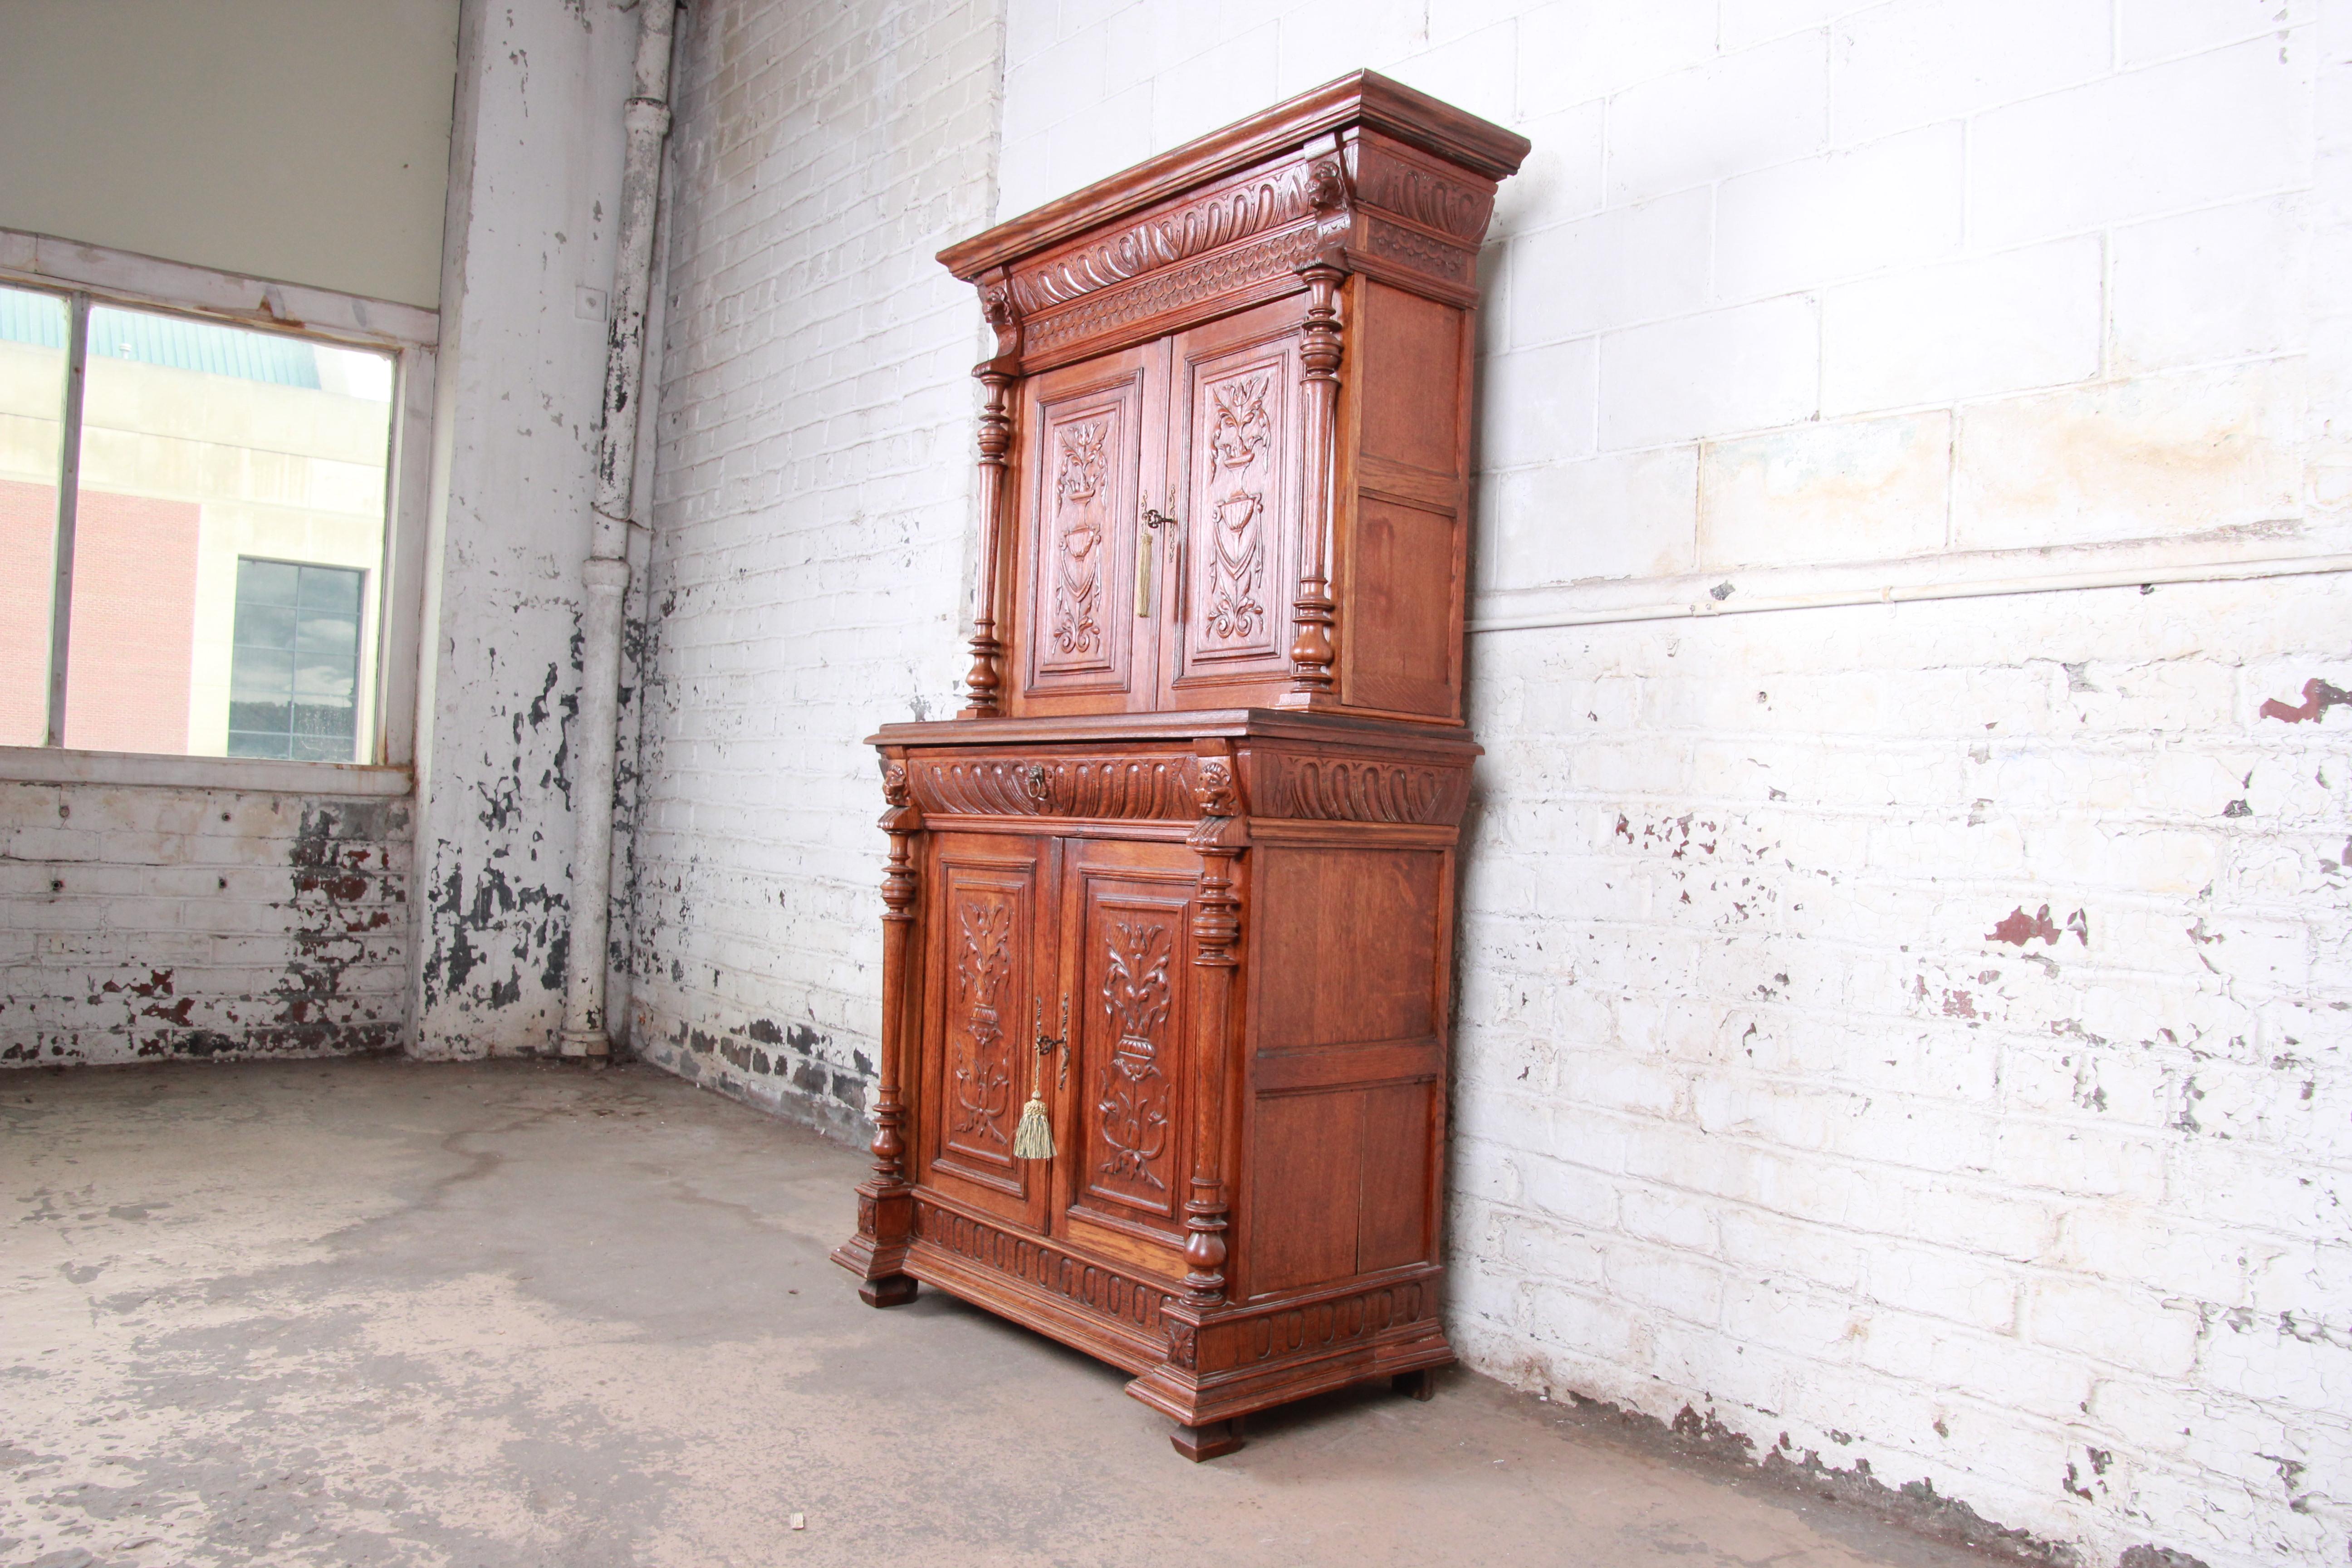 An exceptional ornate carved oak sideboard hutch or bar cabinet made in France, circa 1900. The cabinet features solid oak construction with heavy carvings including lion heads, urns, and floral and figural patterns. It offers excellent storage,